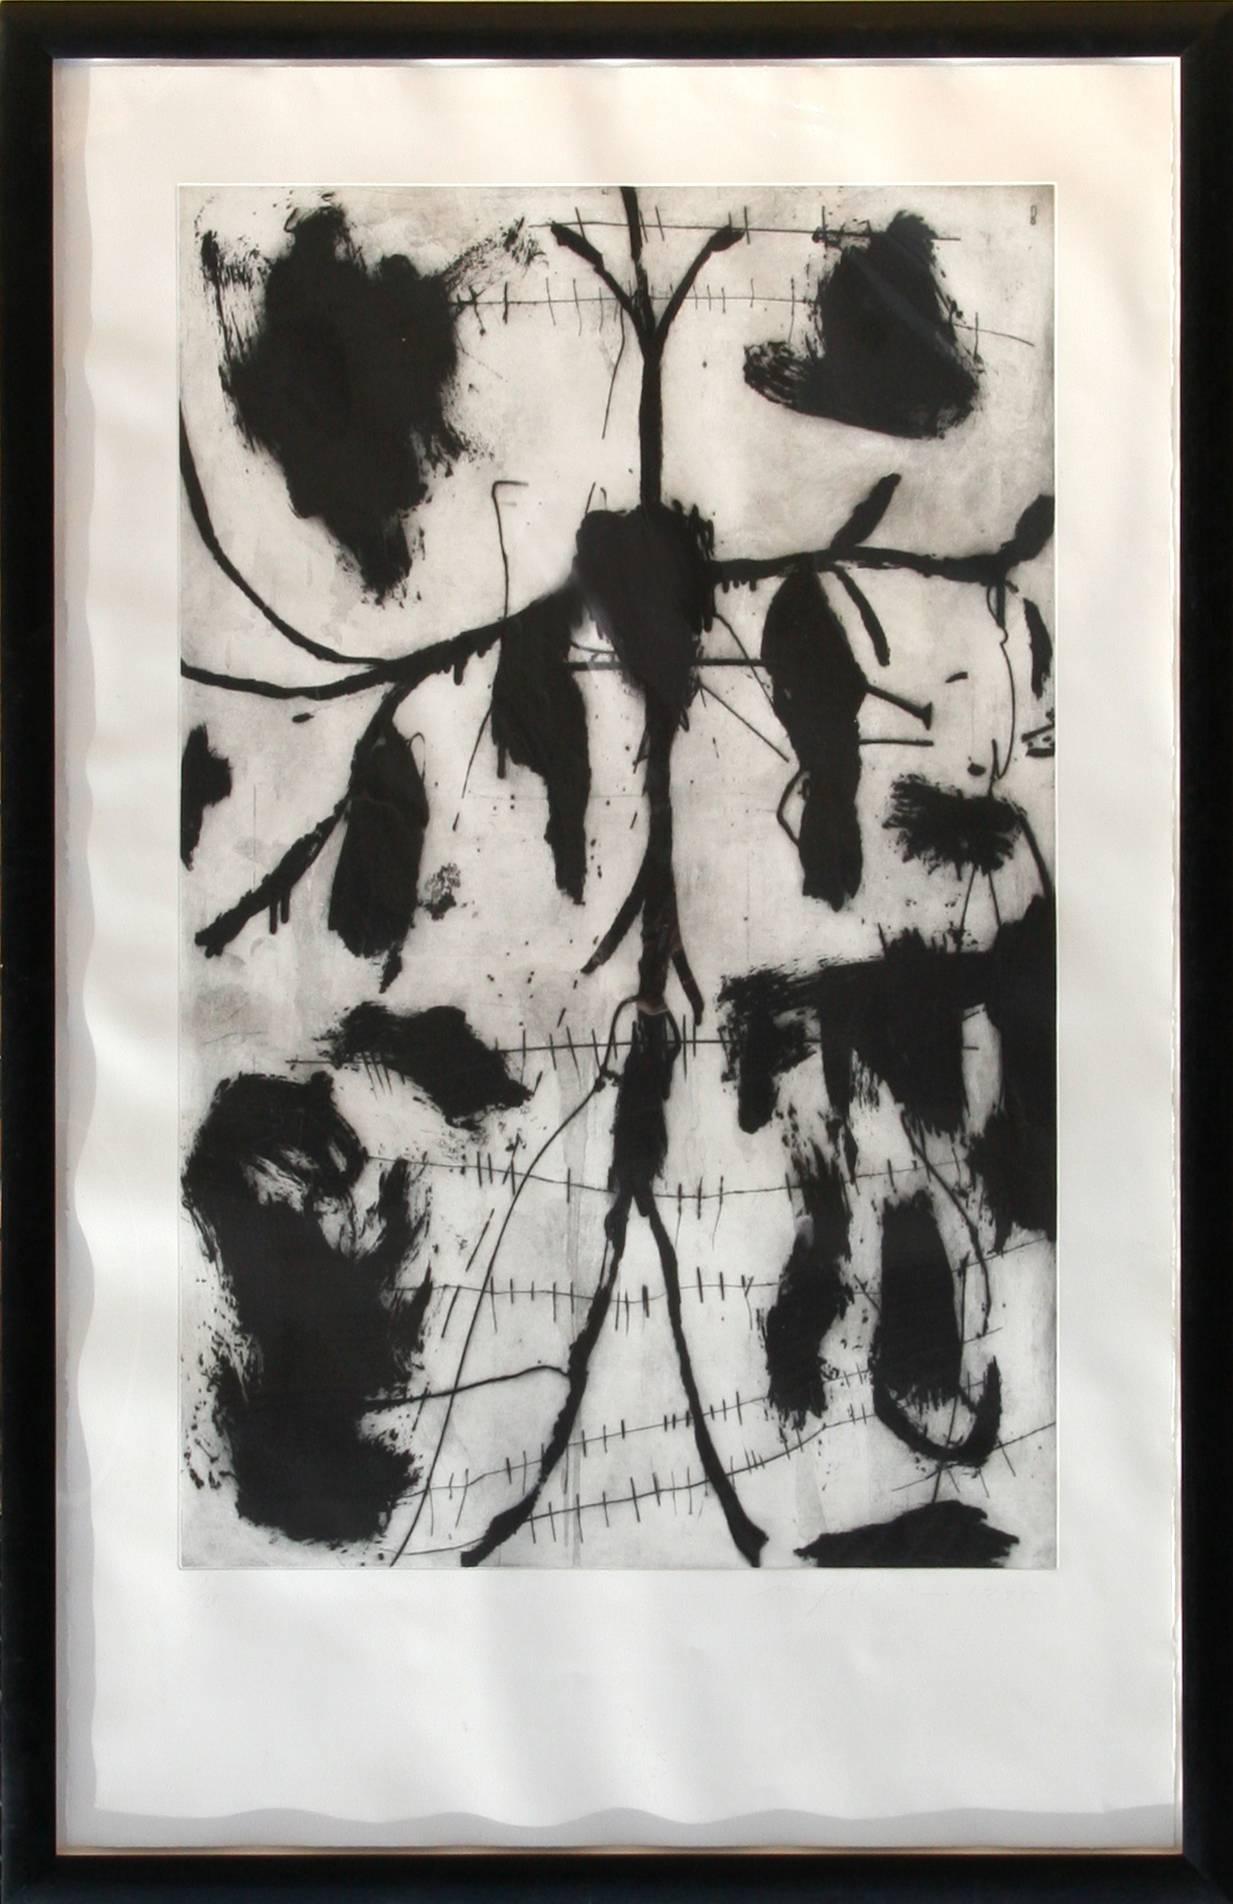 A set of three monumental etchings by Italian contemporary artist, Mimmo Paladino.  Each nicely framed in black. 

Artist: Mimmo Paladino 
Title:	Sirene, Vespero and Poeta Occidentale
Year: 1995
Medium: Suite of three Etchings, Dry-Point, Aquatint,